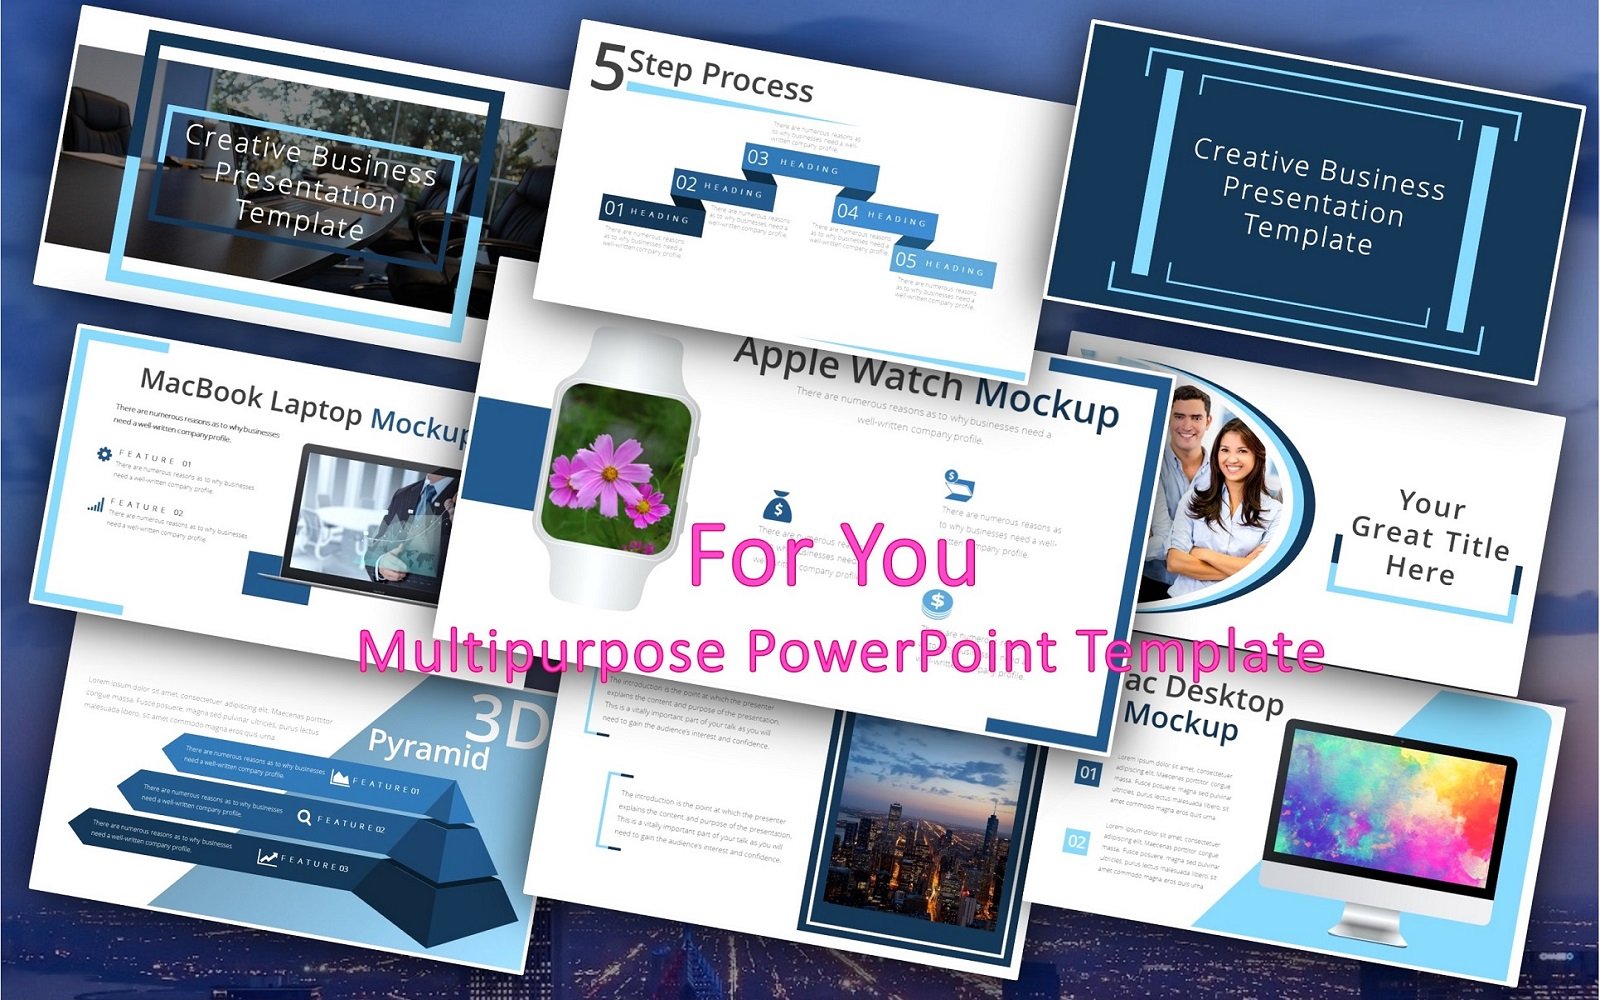 For You Multipurpose PowerPoint Template